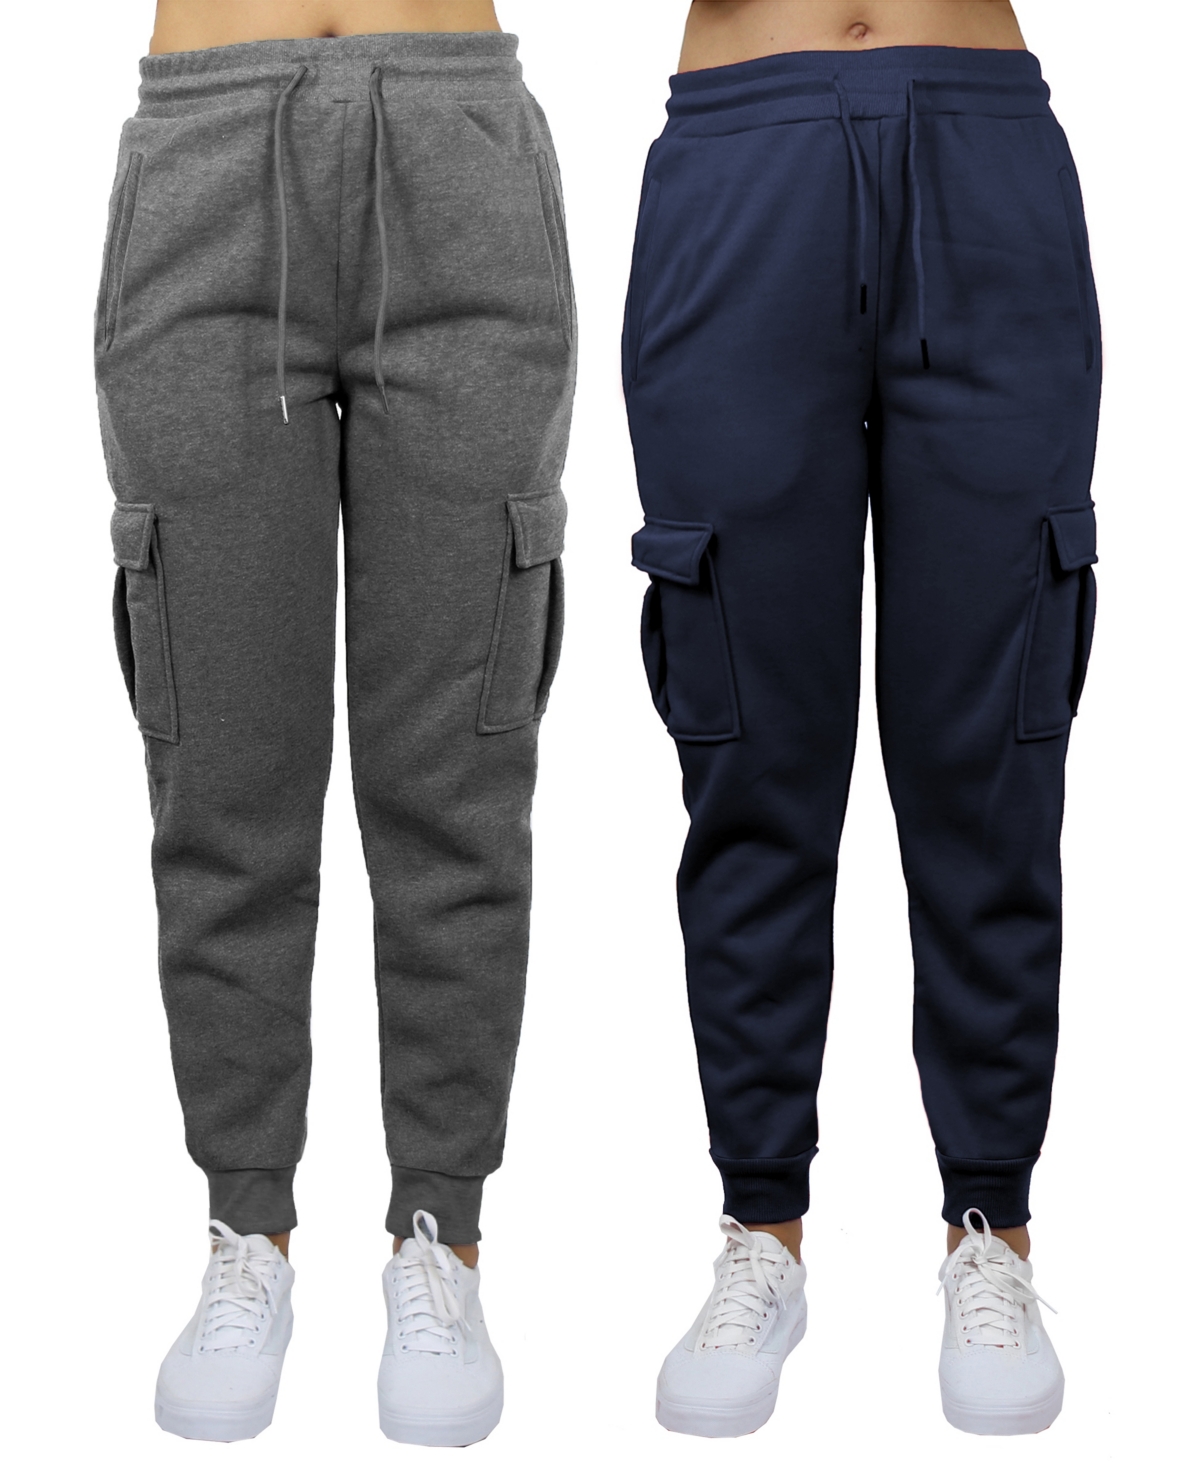 Galaxy By Harvic Women's Heavyweight Loose Fit Fleece Lined Cargo Jogger Pants Set, 2 Pack In Heather Gray,navy